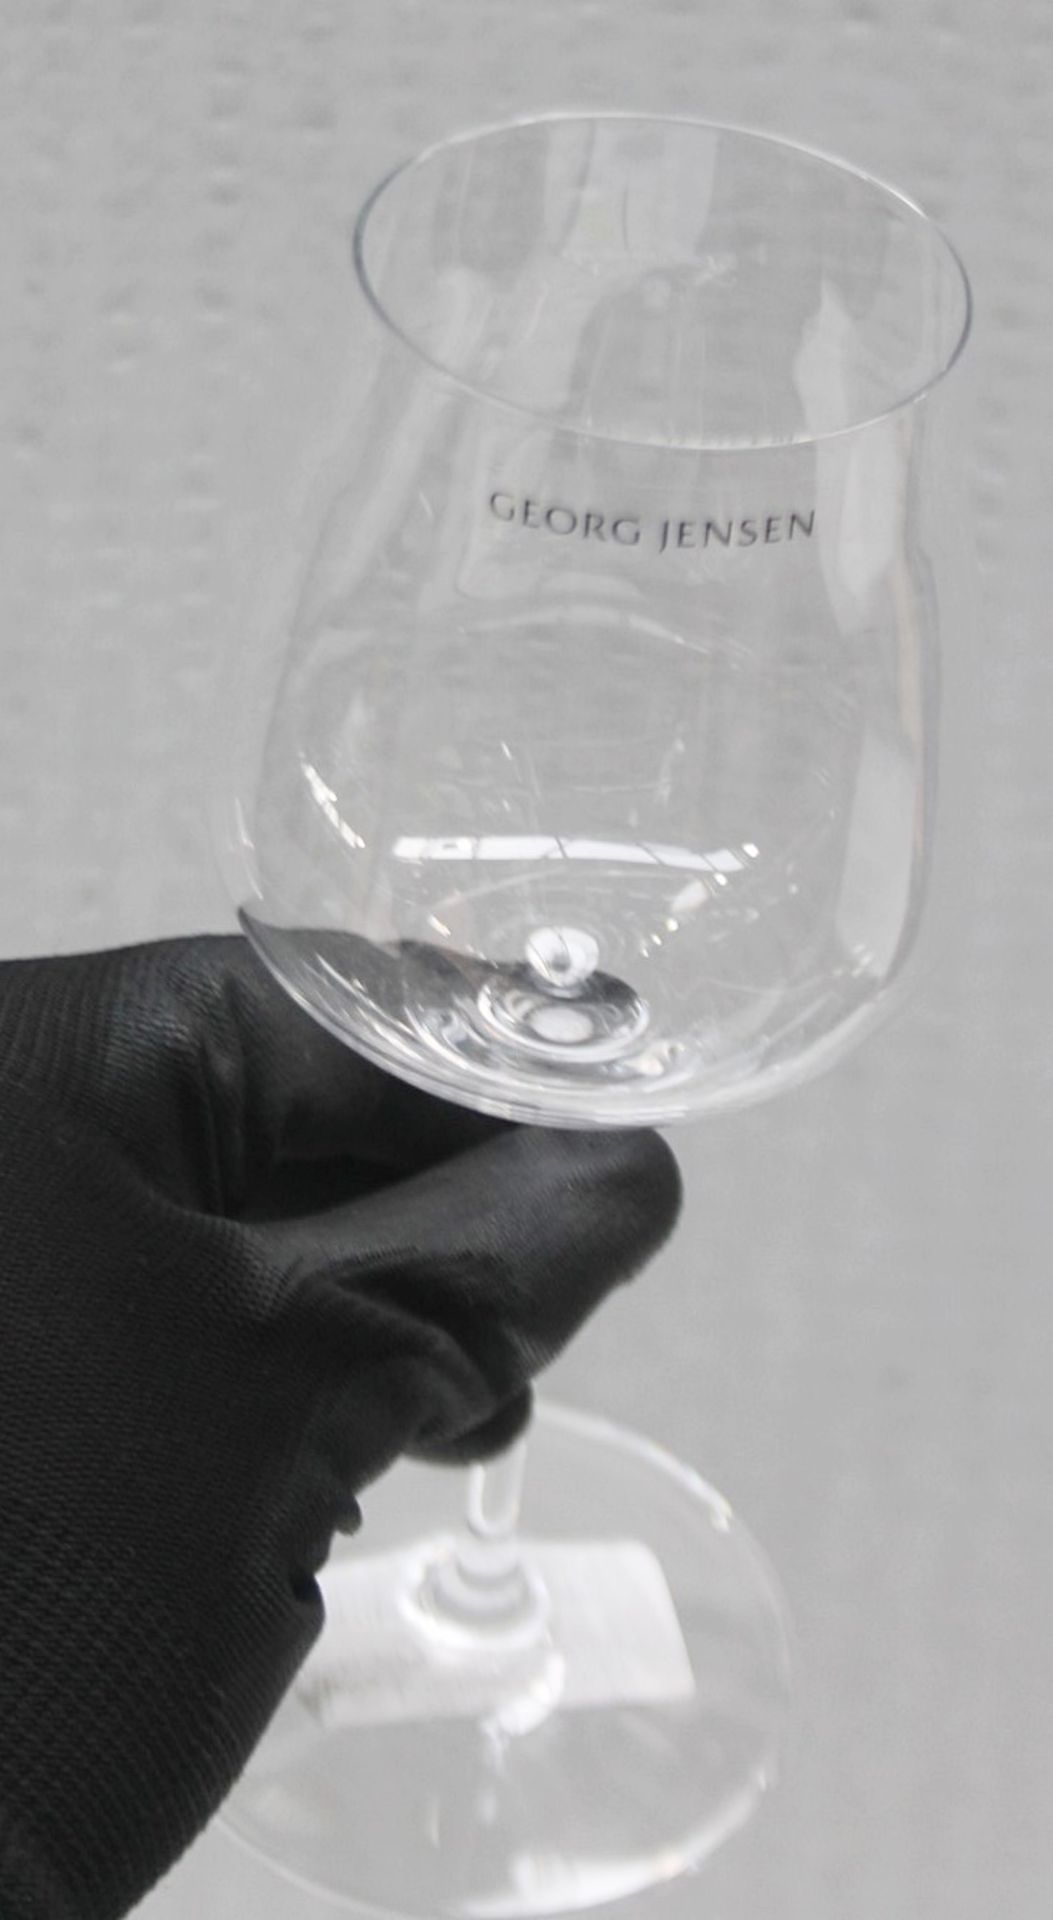 5 x GEORG JENSEN 'Sky' Crystal White Wine Glass - Ref: 6864831/HAS2157/WH2-C5/02-23-1 - CL987 - - Image 8 of 8